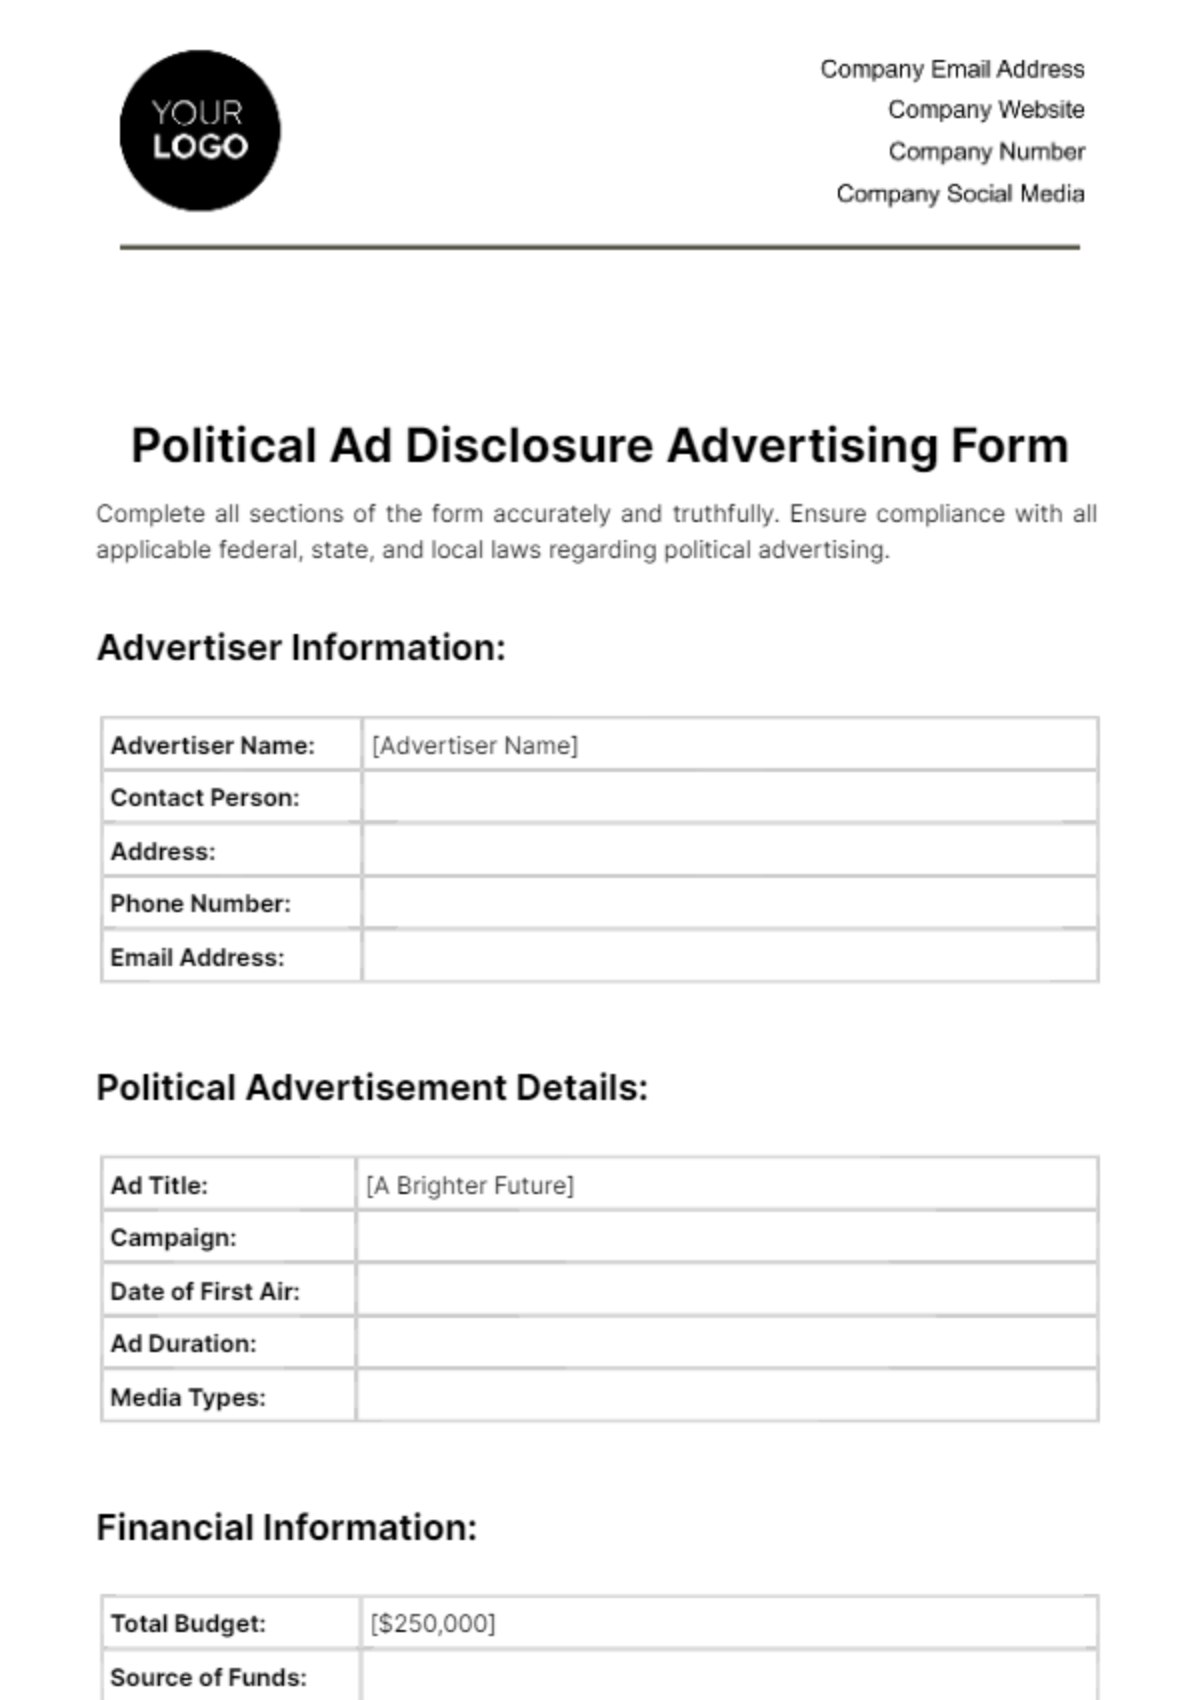 Free Political Ad Disclosure Advertising Form Template